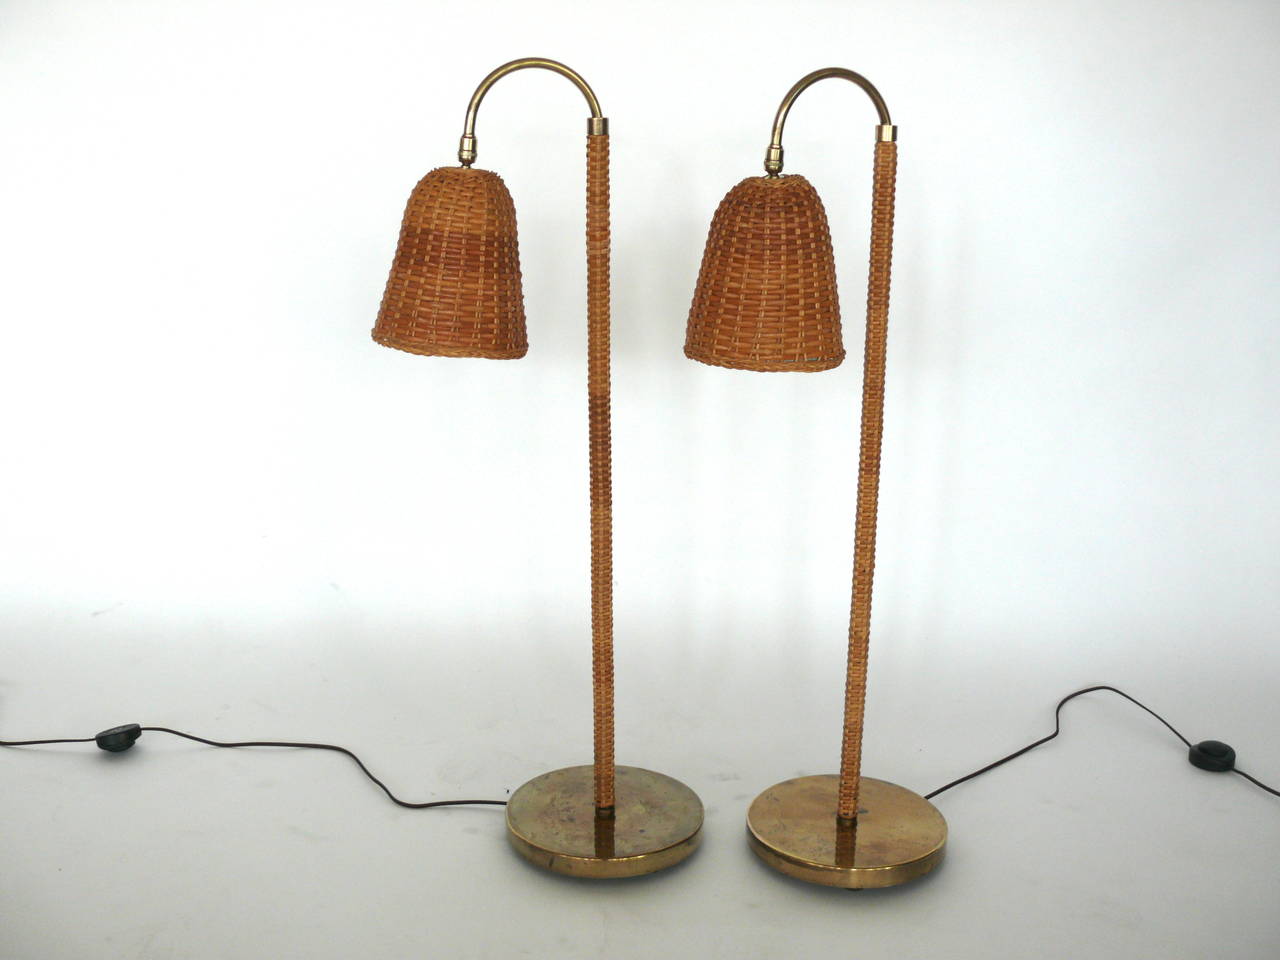 Fantastic pair of Rattan, wicker and brass floor lamps. Lamps are height adjustable with a pivoting shade. Neck of floor lamp is rattan with a brass base. Excellent vintage condition. Newly rewired. Illuminates beautifully.